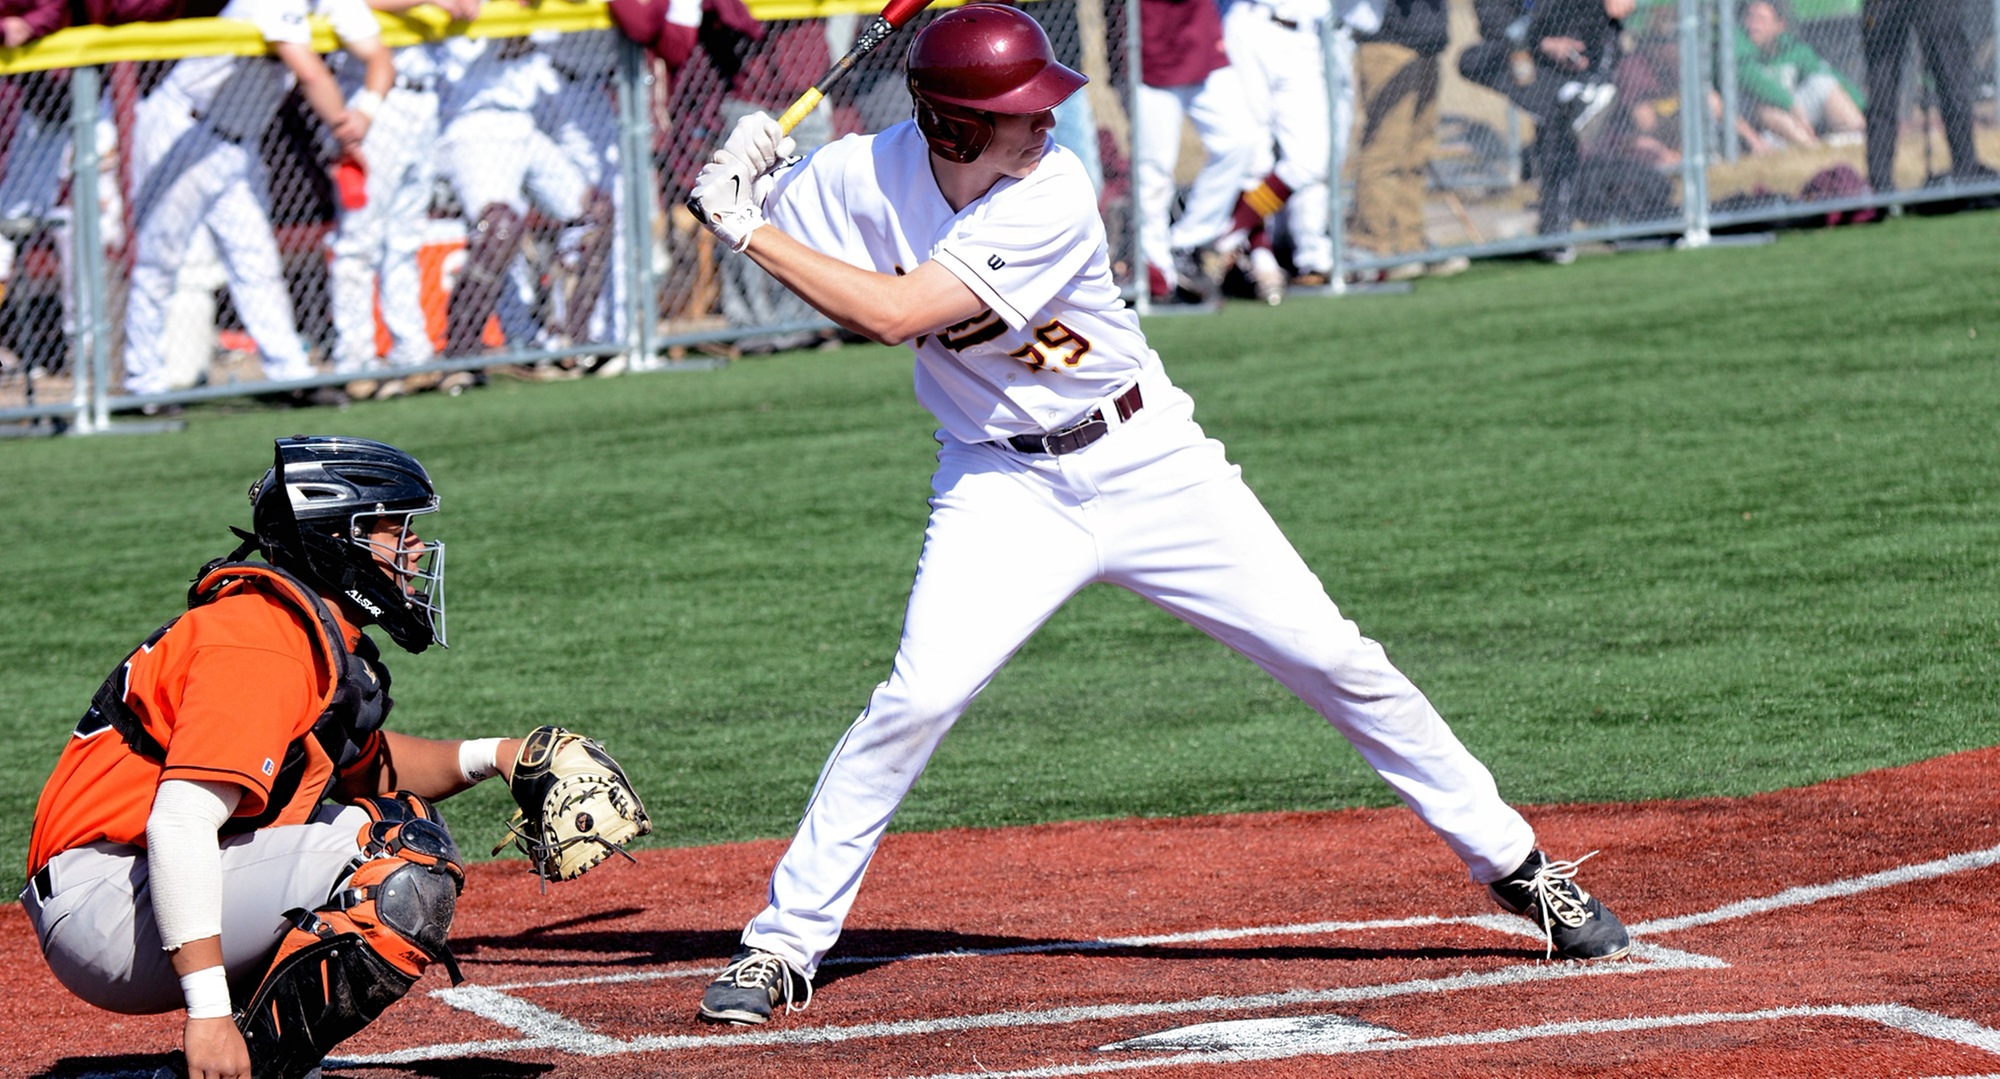 Junior Turner Storm had the lone hit for the Cobbers in their game with Alma.